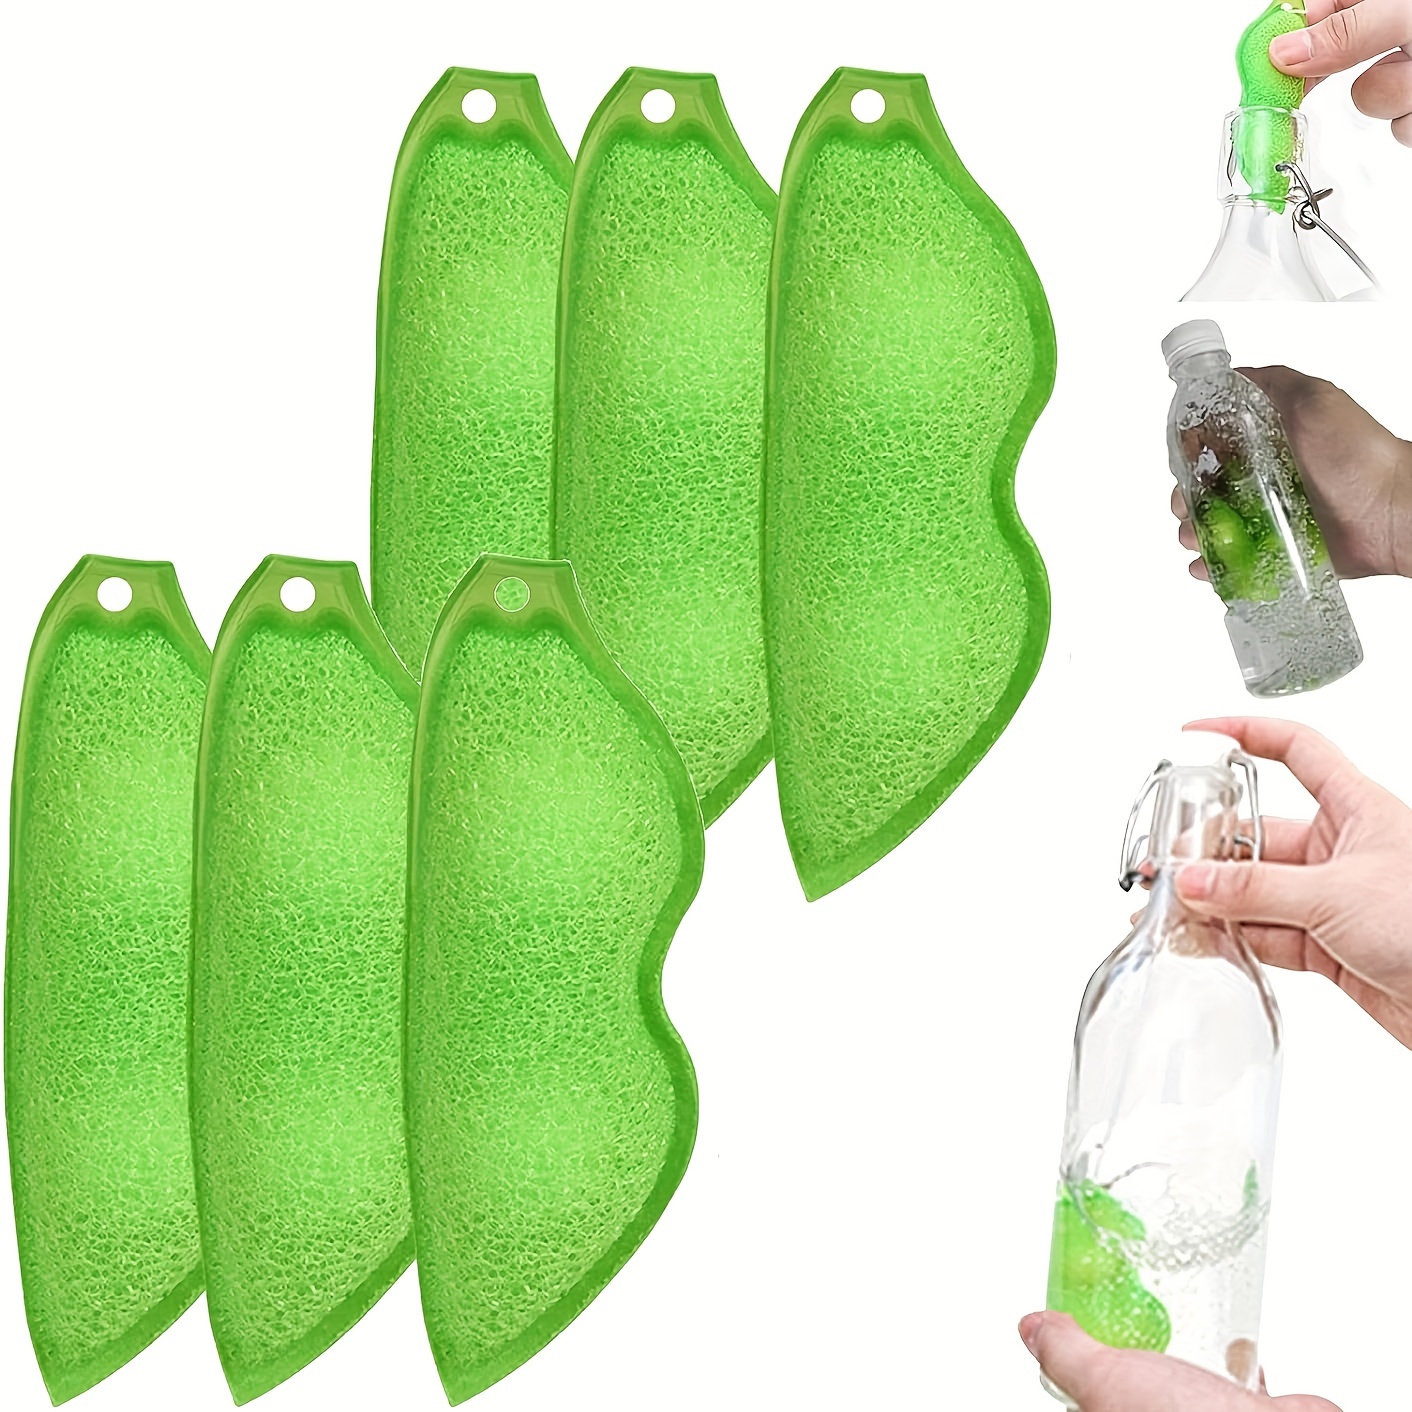  Magic Beans Bottle Cleaner, Beans-Shaped Bottle Cleaning  Sponge, Beans Bottle Cleaning Sponge, Water Bottle Cleaning Beans,  Reuseable Small Mouth Bottle Cleaning Spong (6pcs-A) : Health & Household